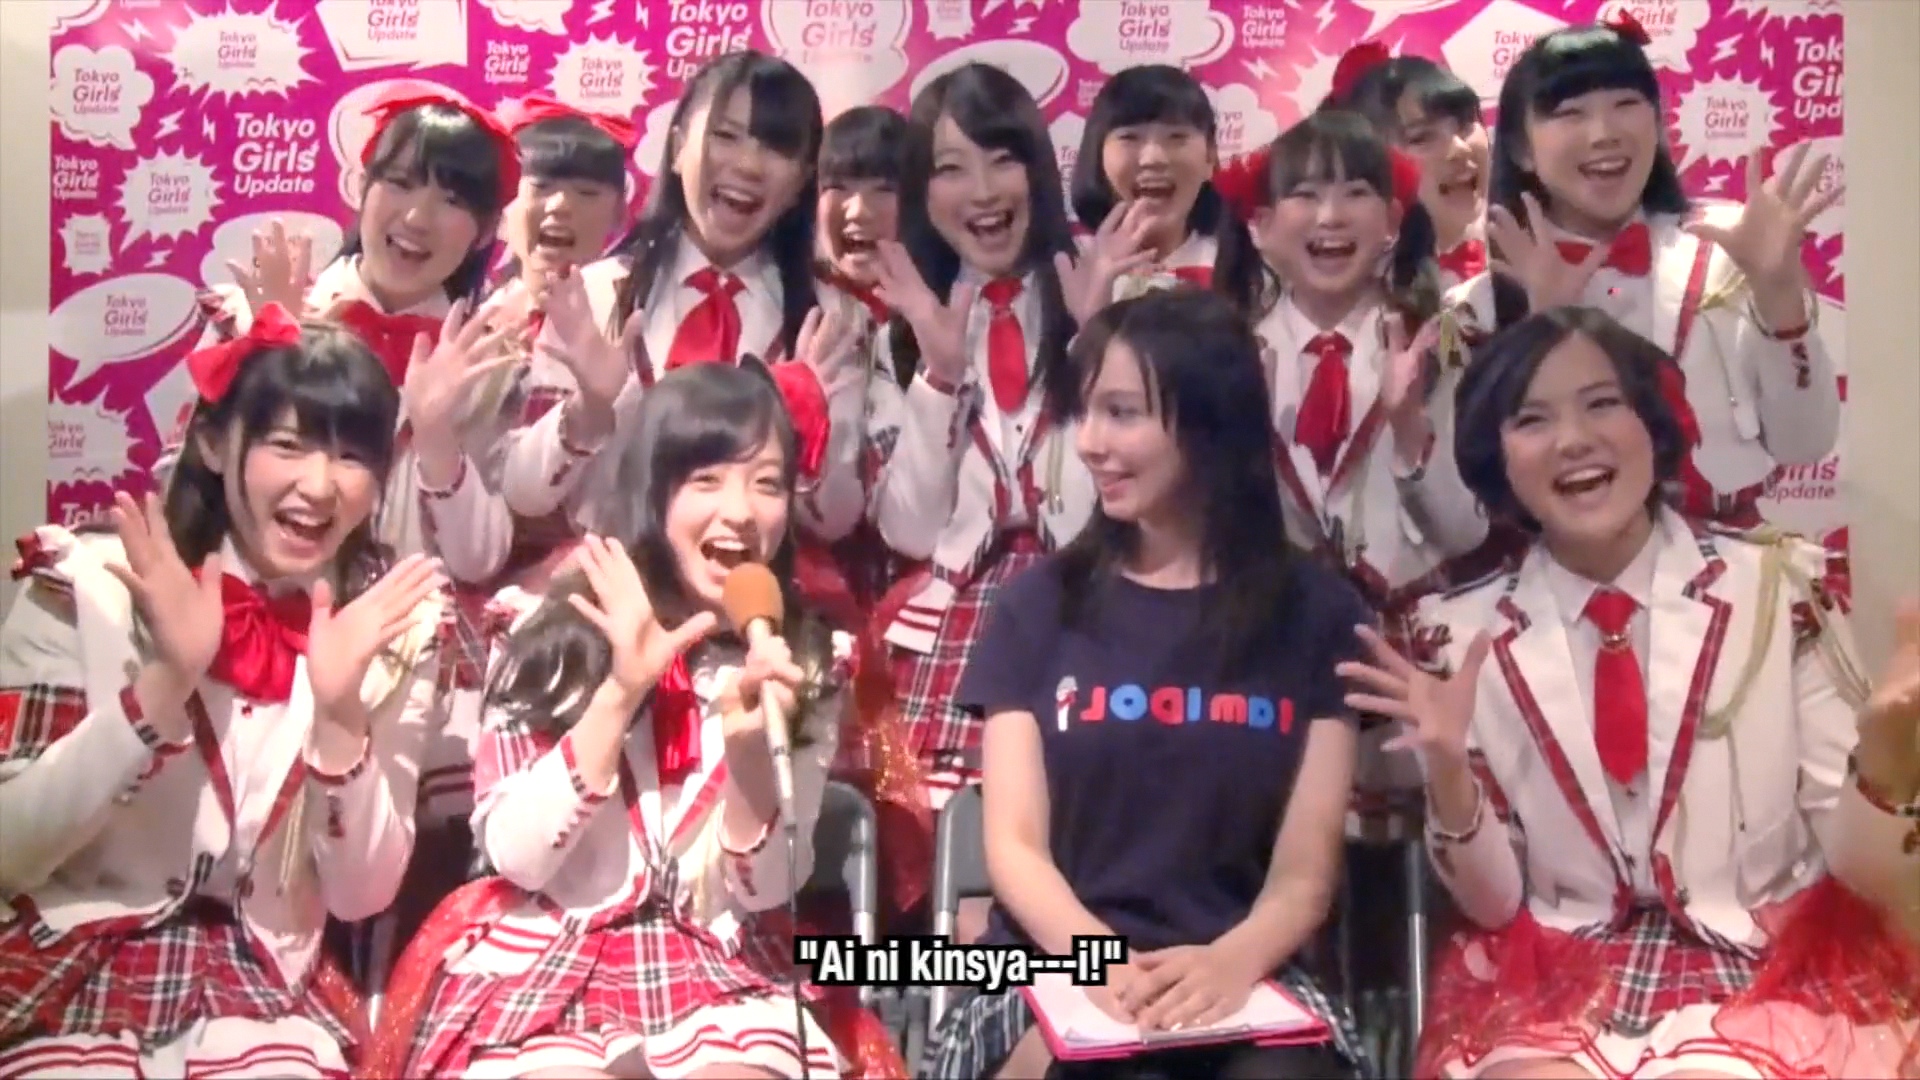 KAWAii!! NiPPON EXPO 2014 SPECIAL INTERVIEW : Rev.fromDVL